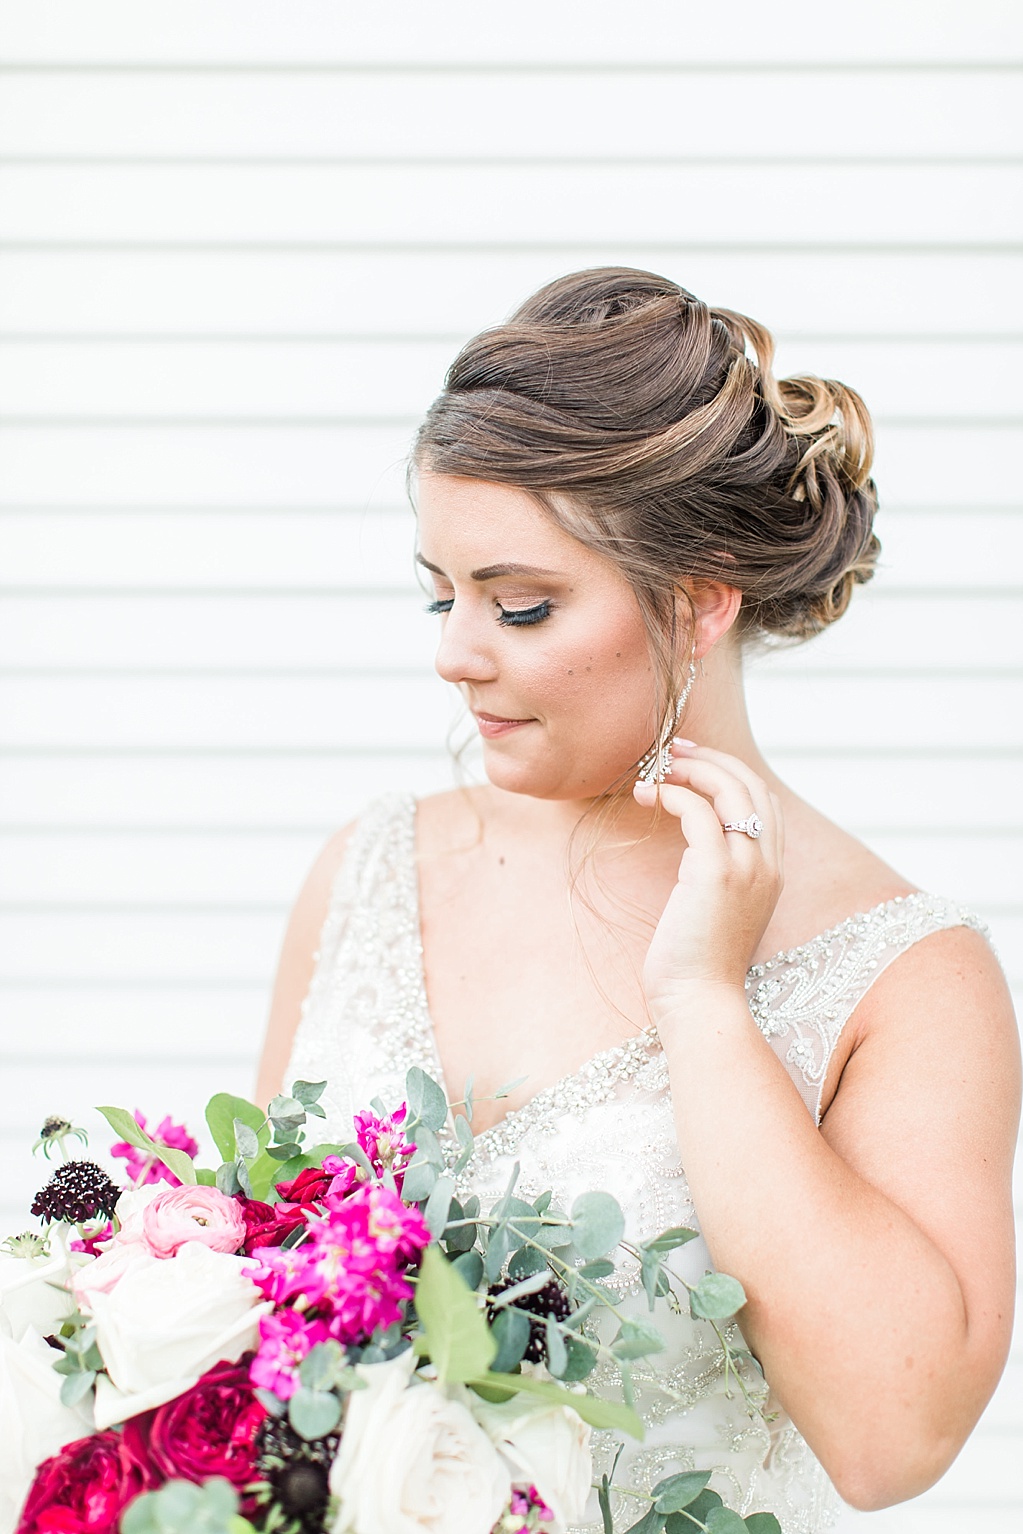 Summer Bridal Session at The Chandelier of Gruene in New Braunfels Texas 0025